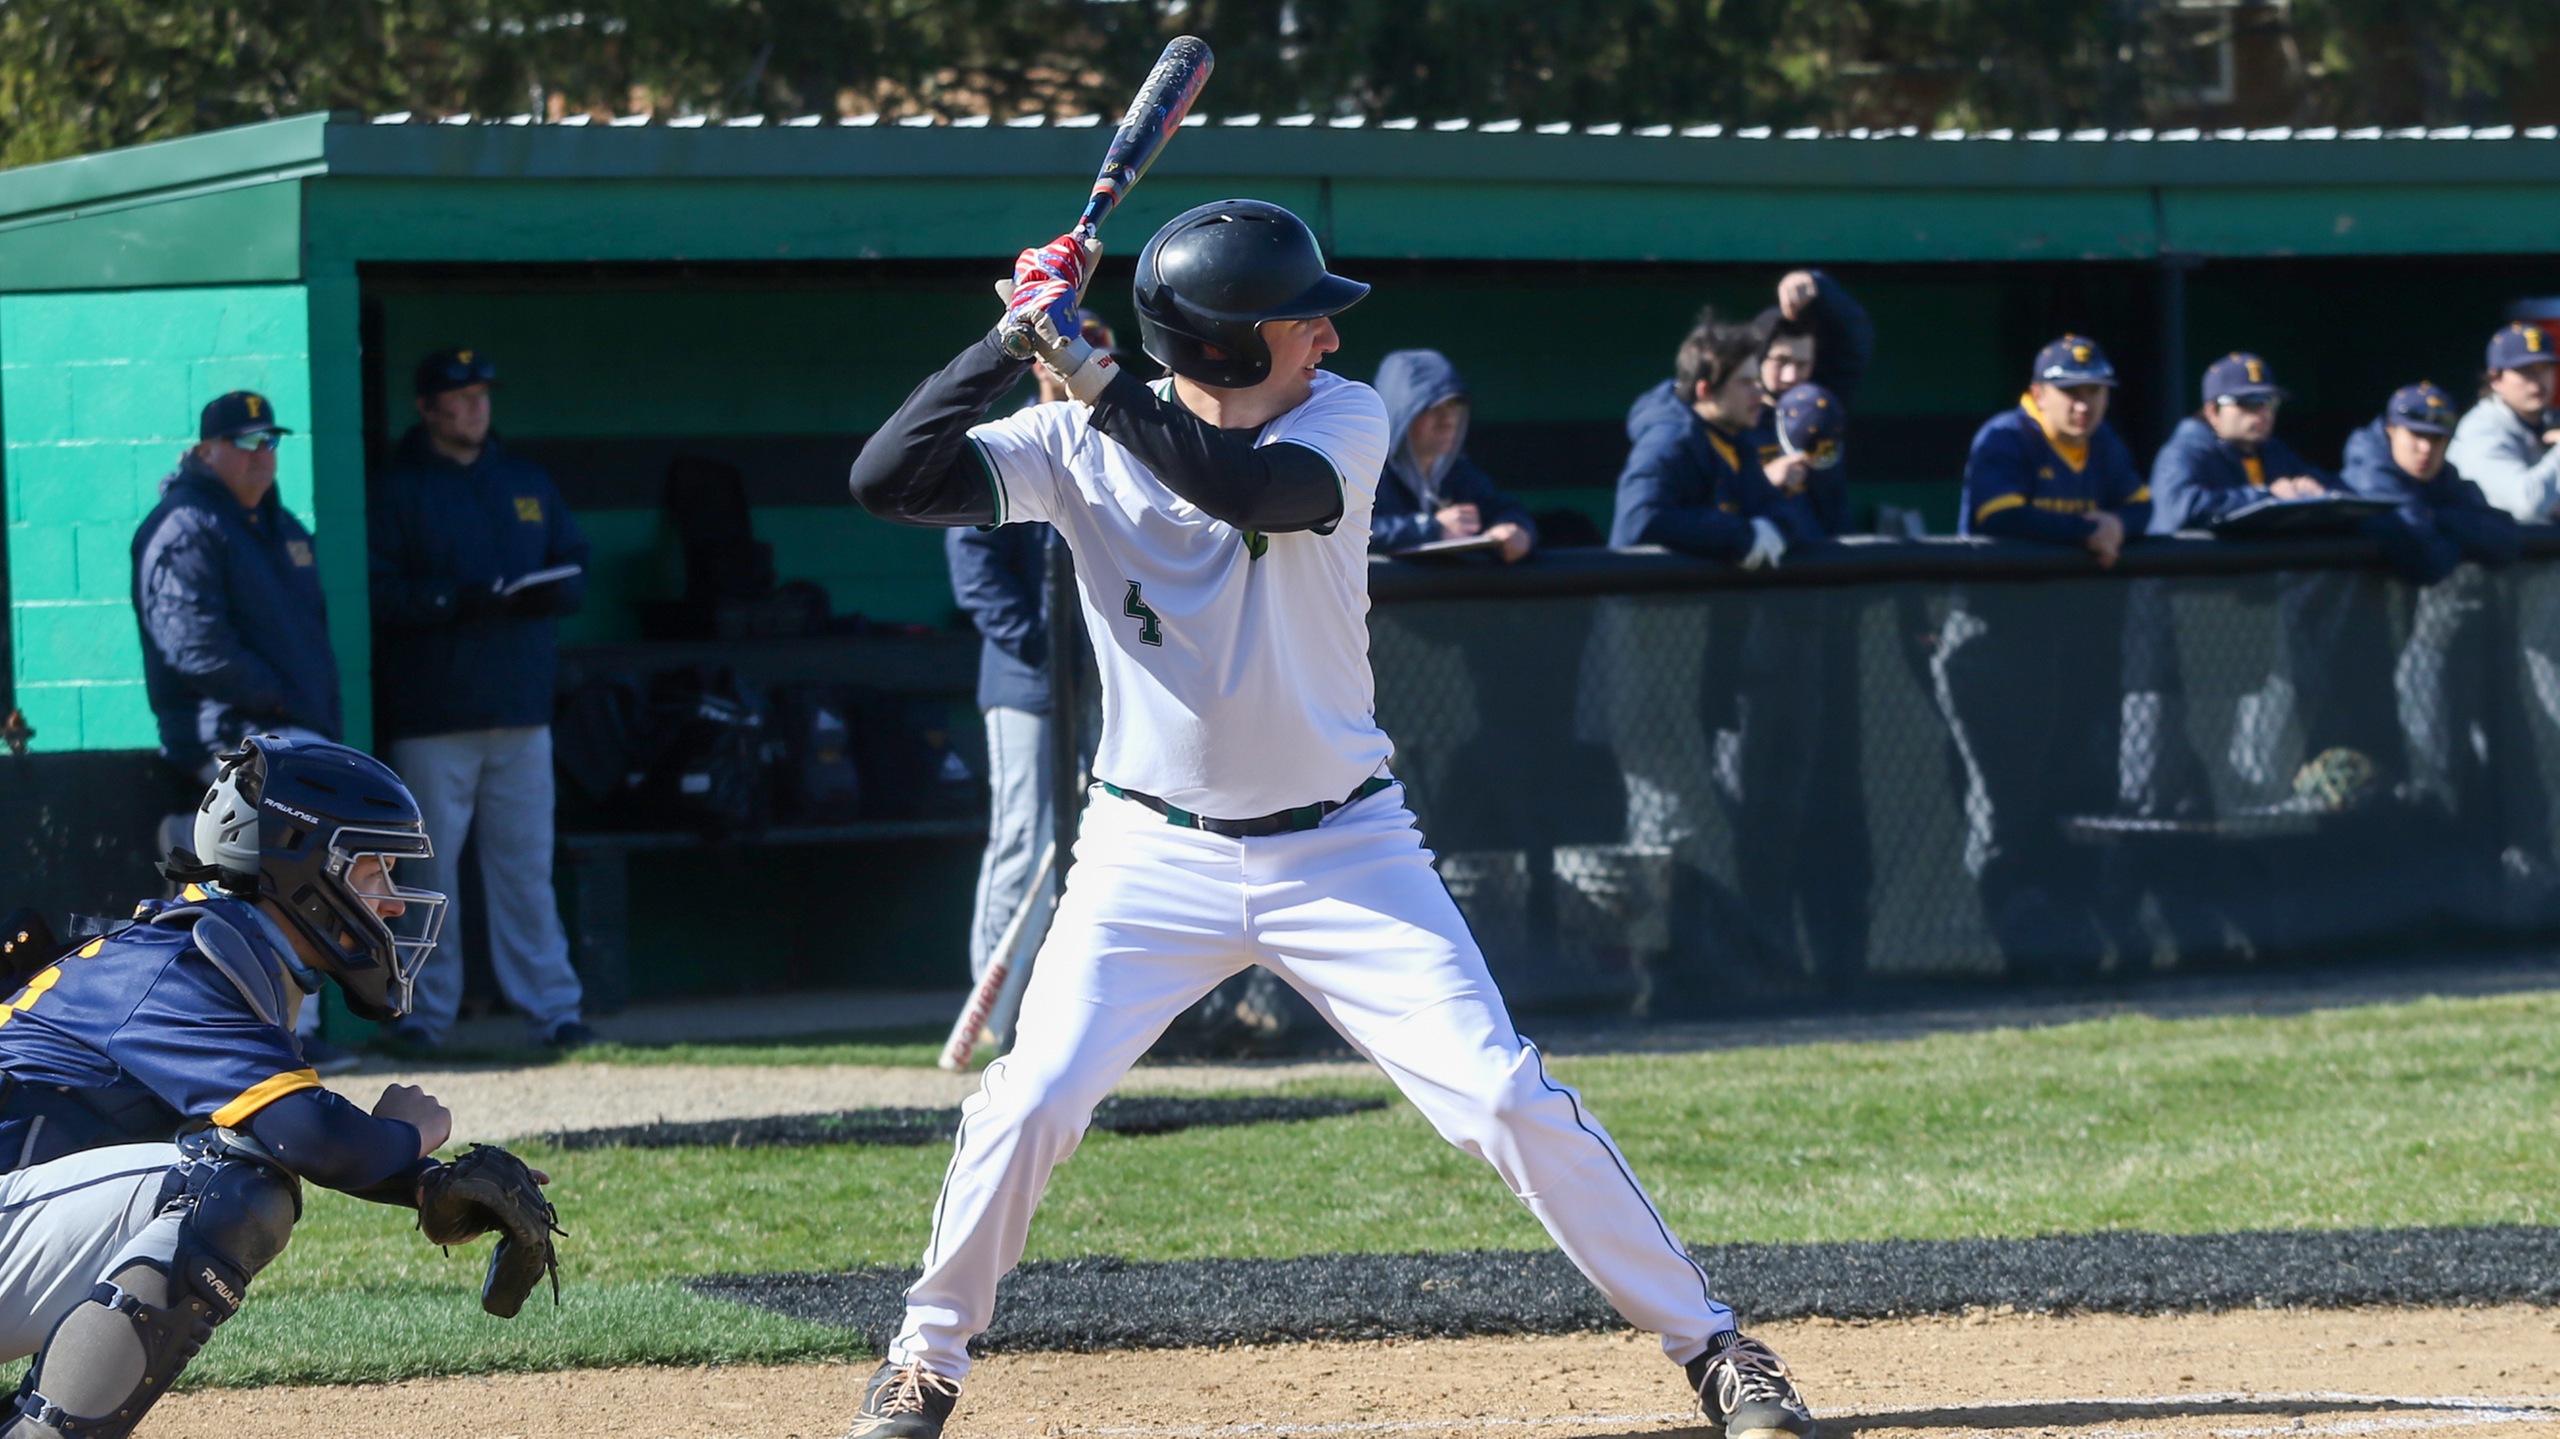 Baseball Finishes Up First Weekend With Doubleheader Loss at Centre